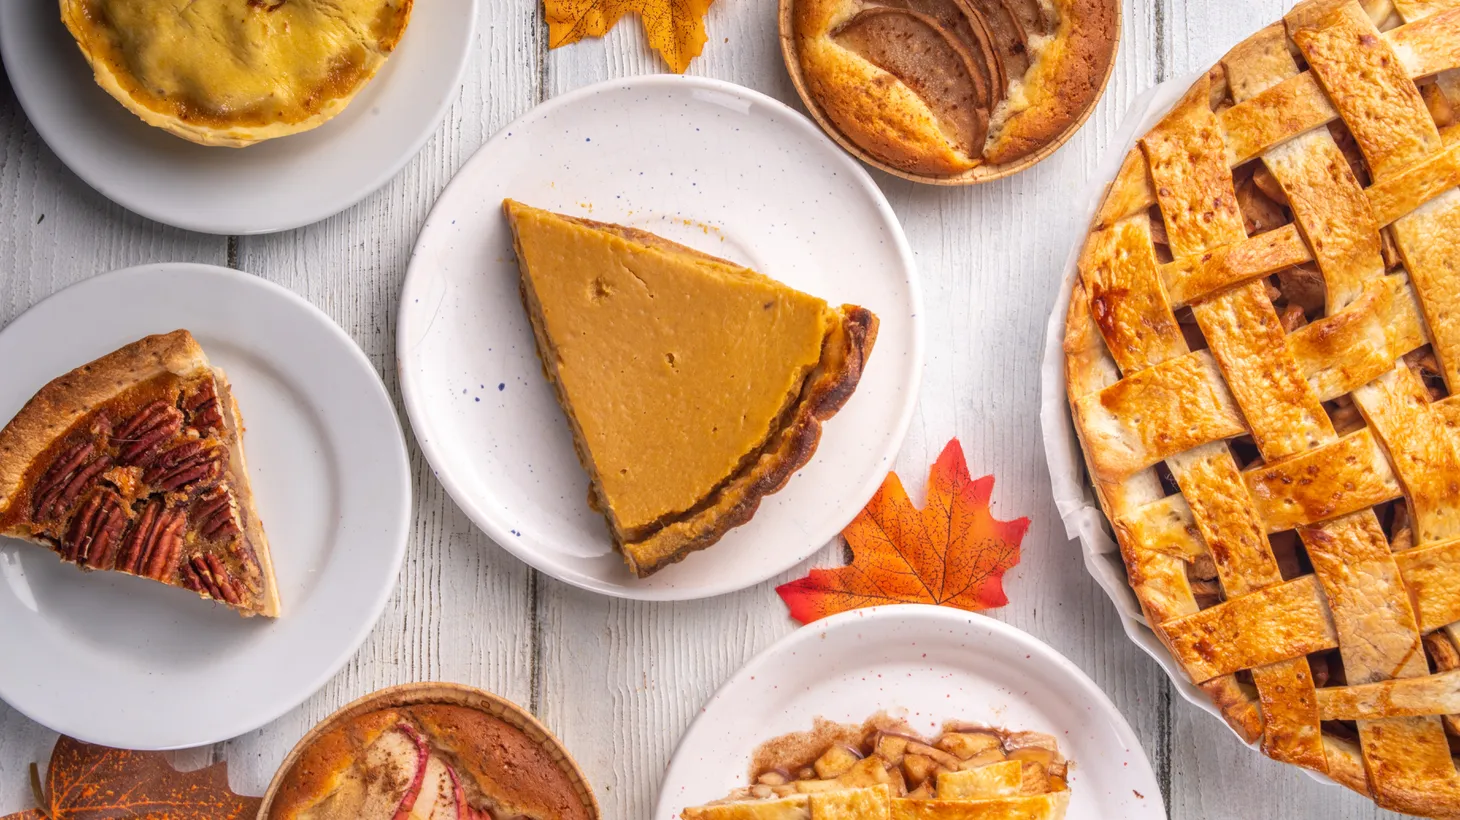 We have an assortment of autumnal pie recipes that would look – and taste! — great on your Thanksgiving table.